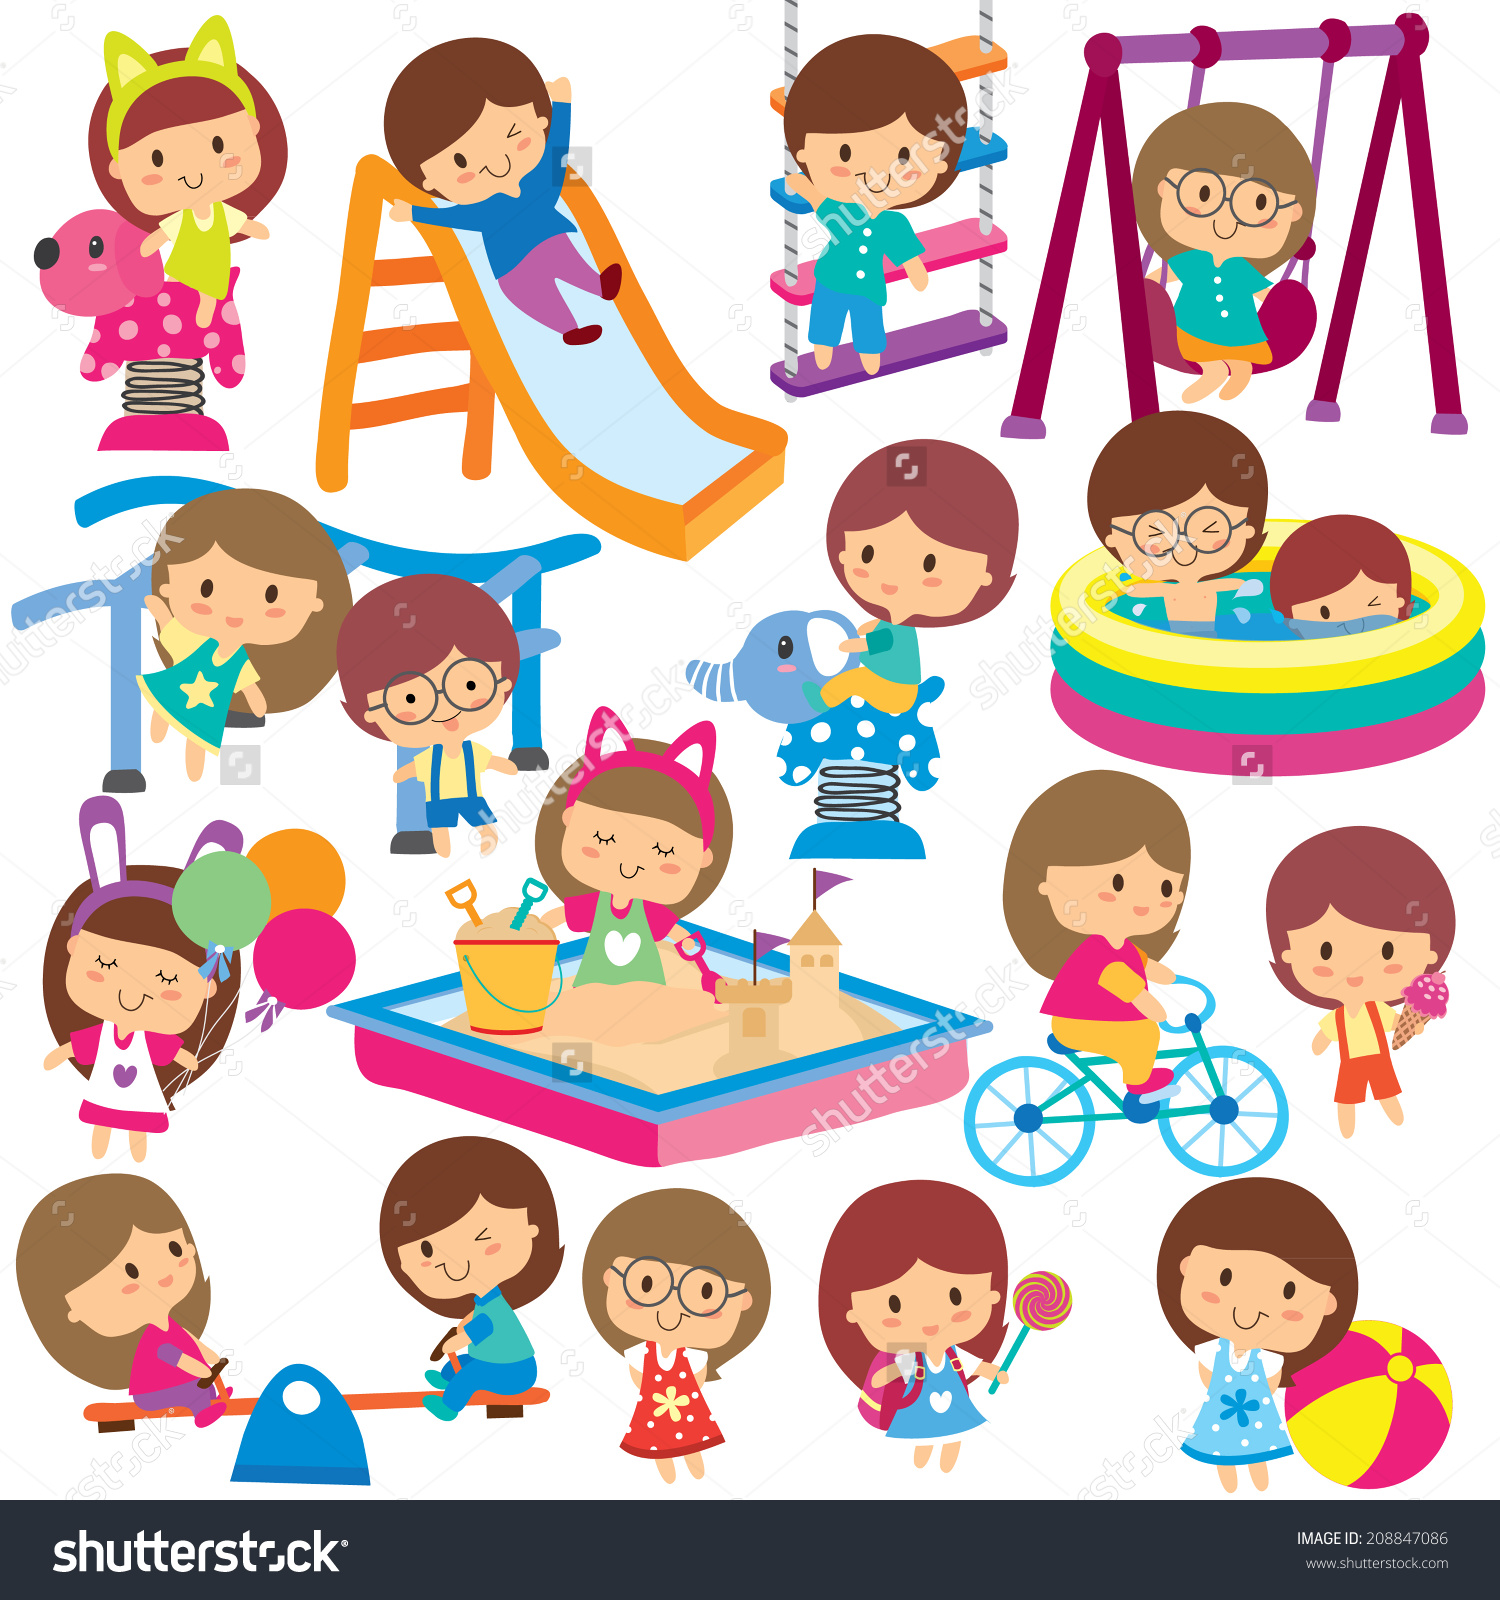 outdoor play clipart - photo #32